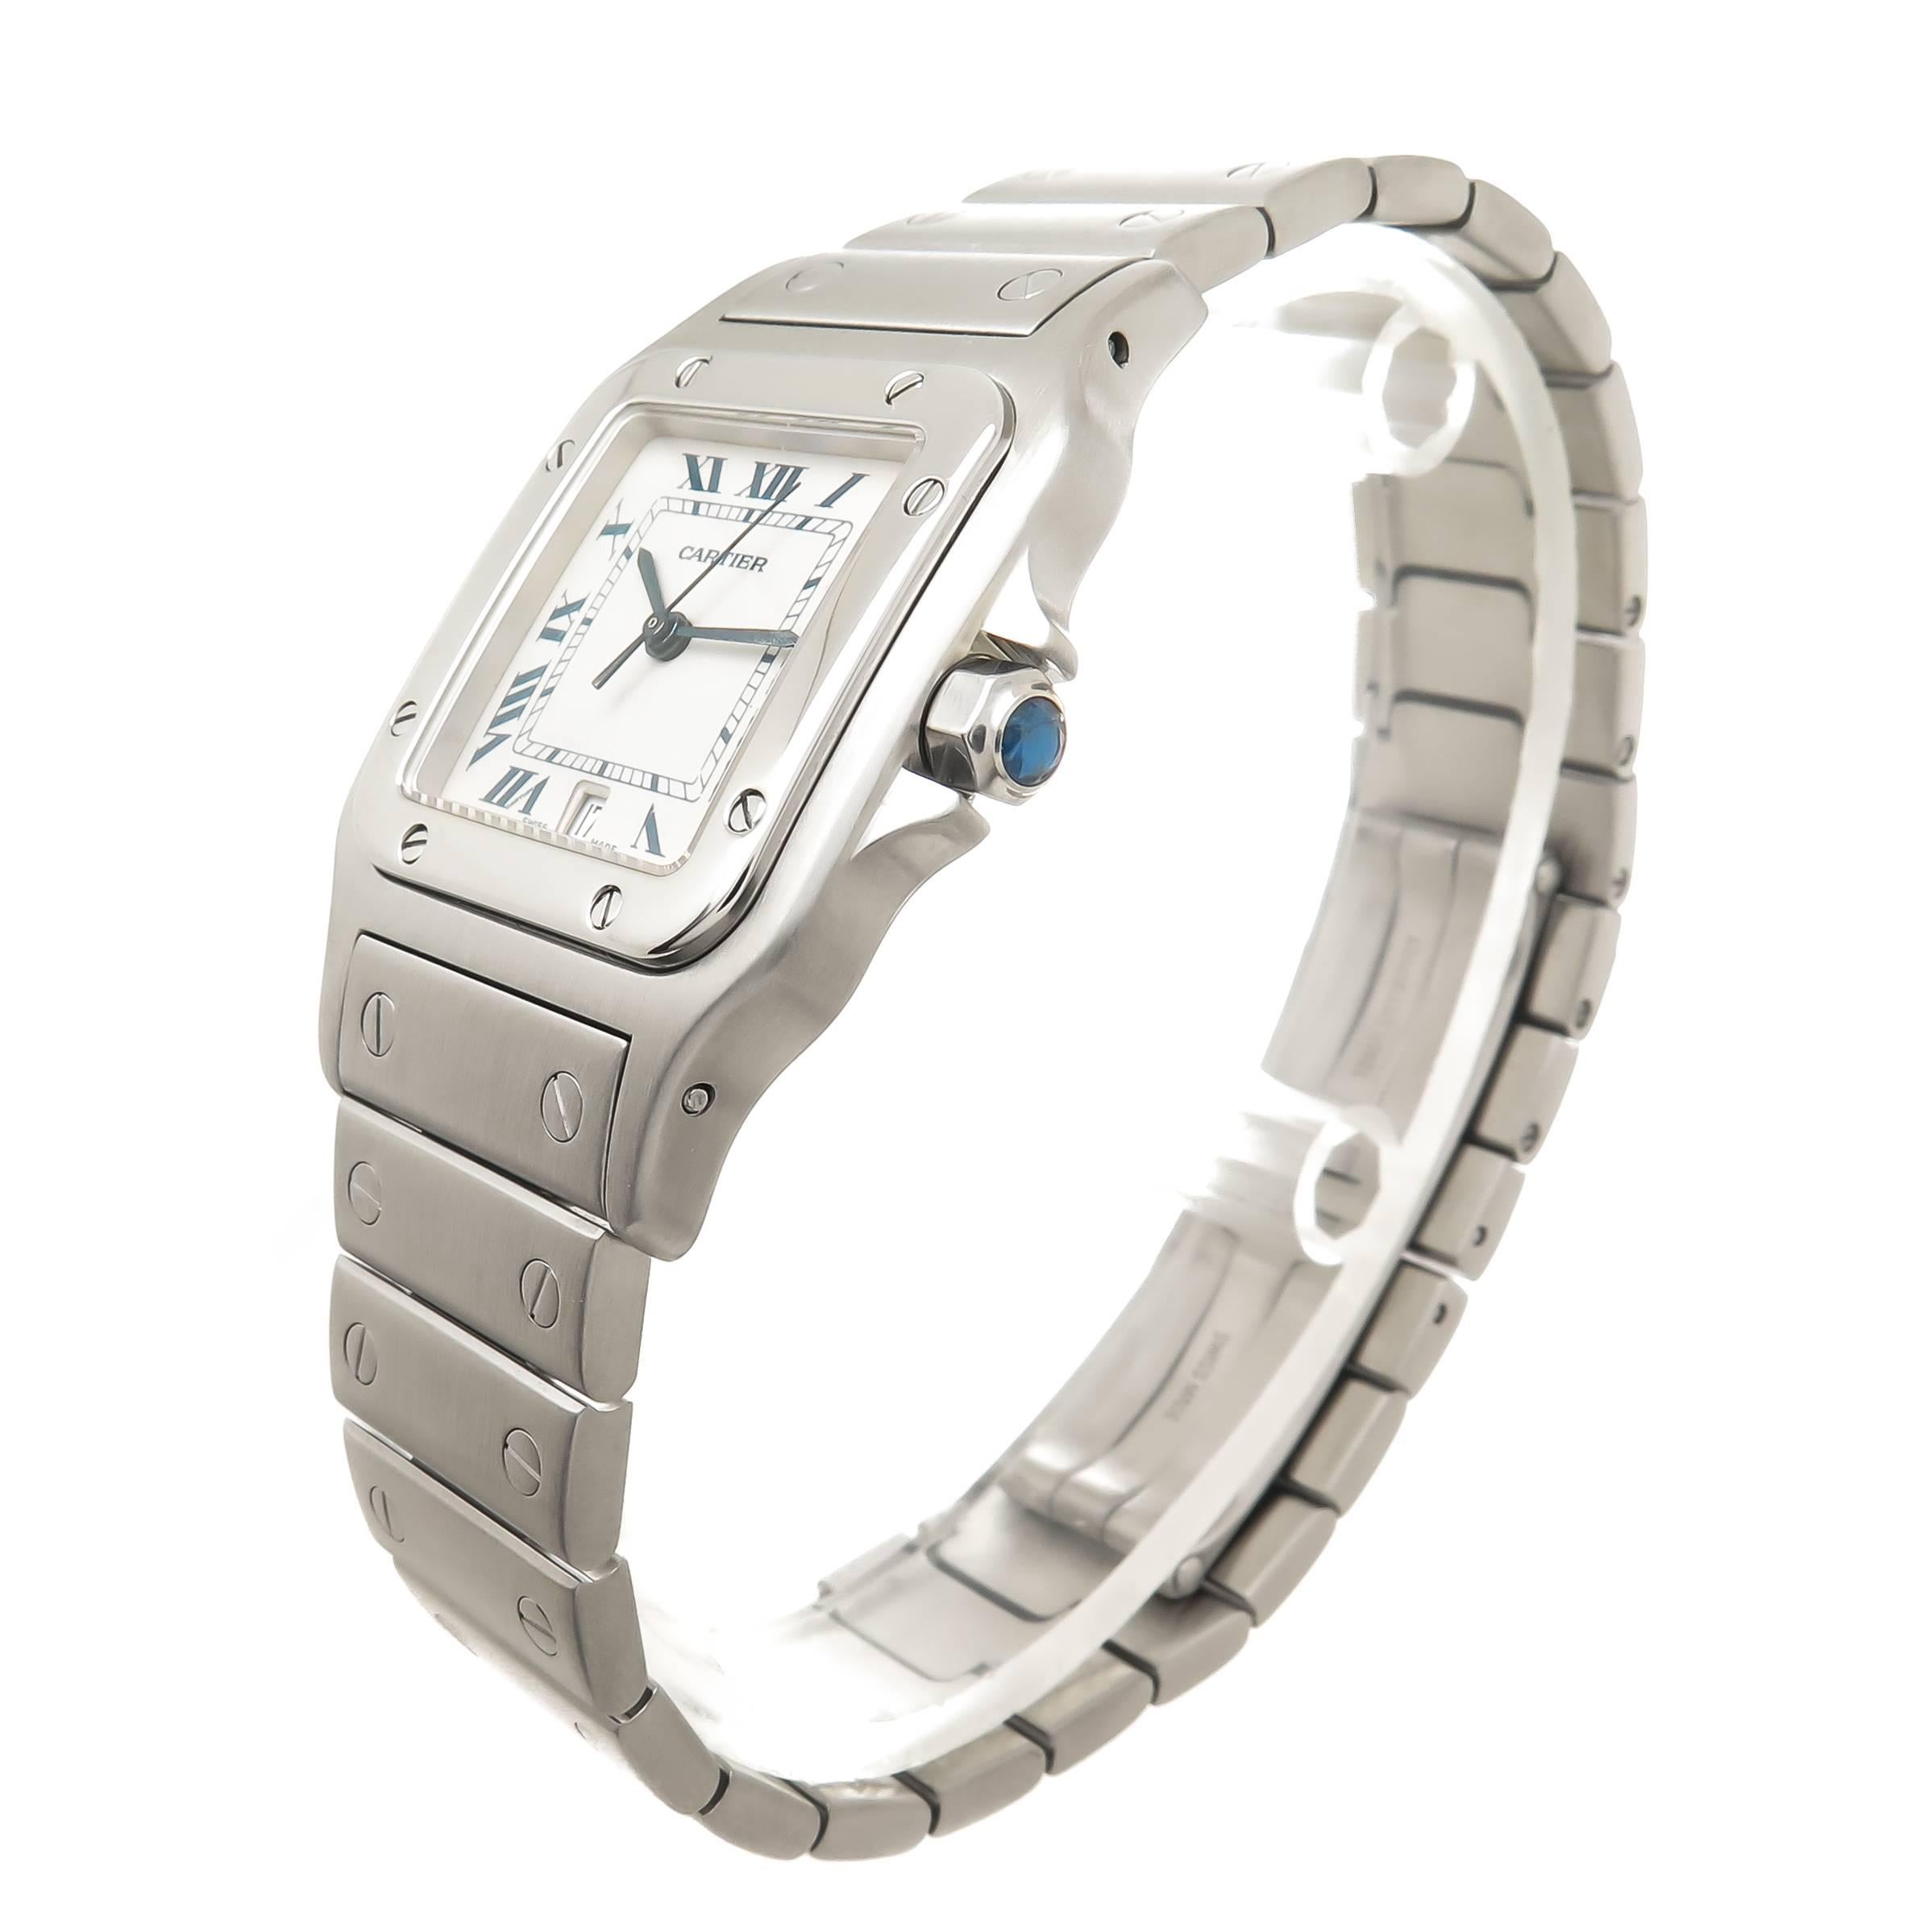 Circa 2000 Cartier Santos, 41 X 29 MM Stainless Steel water resistant case, Matt finish with high polished Bezel, Quartz Movement, White Dial with Black Roman Numerals, sweep seconds hand, Calendar window at the 6, scratch resistant crystal and a